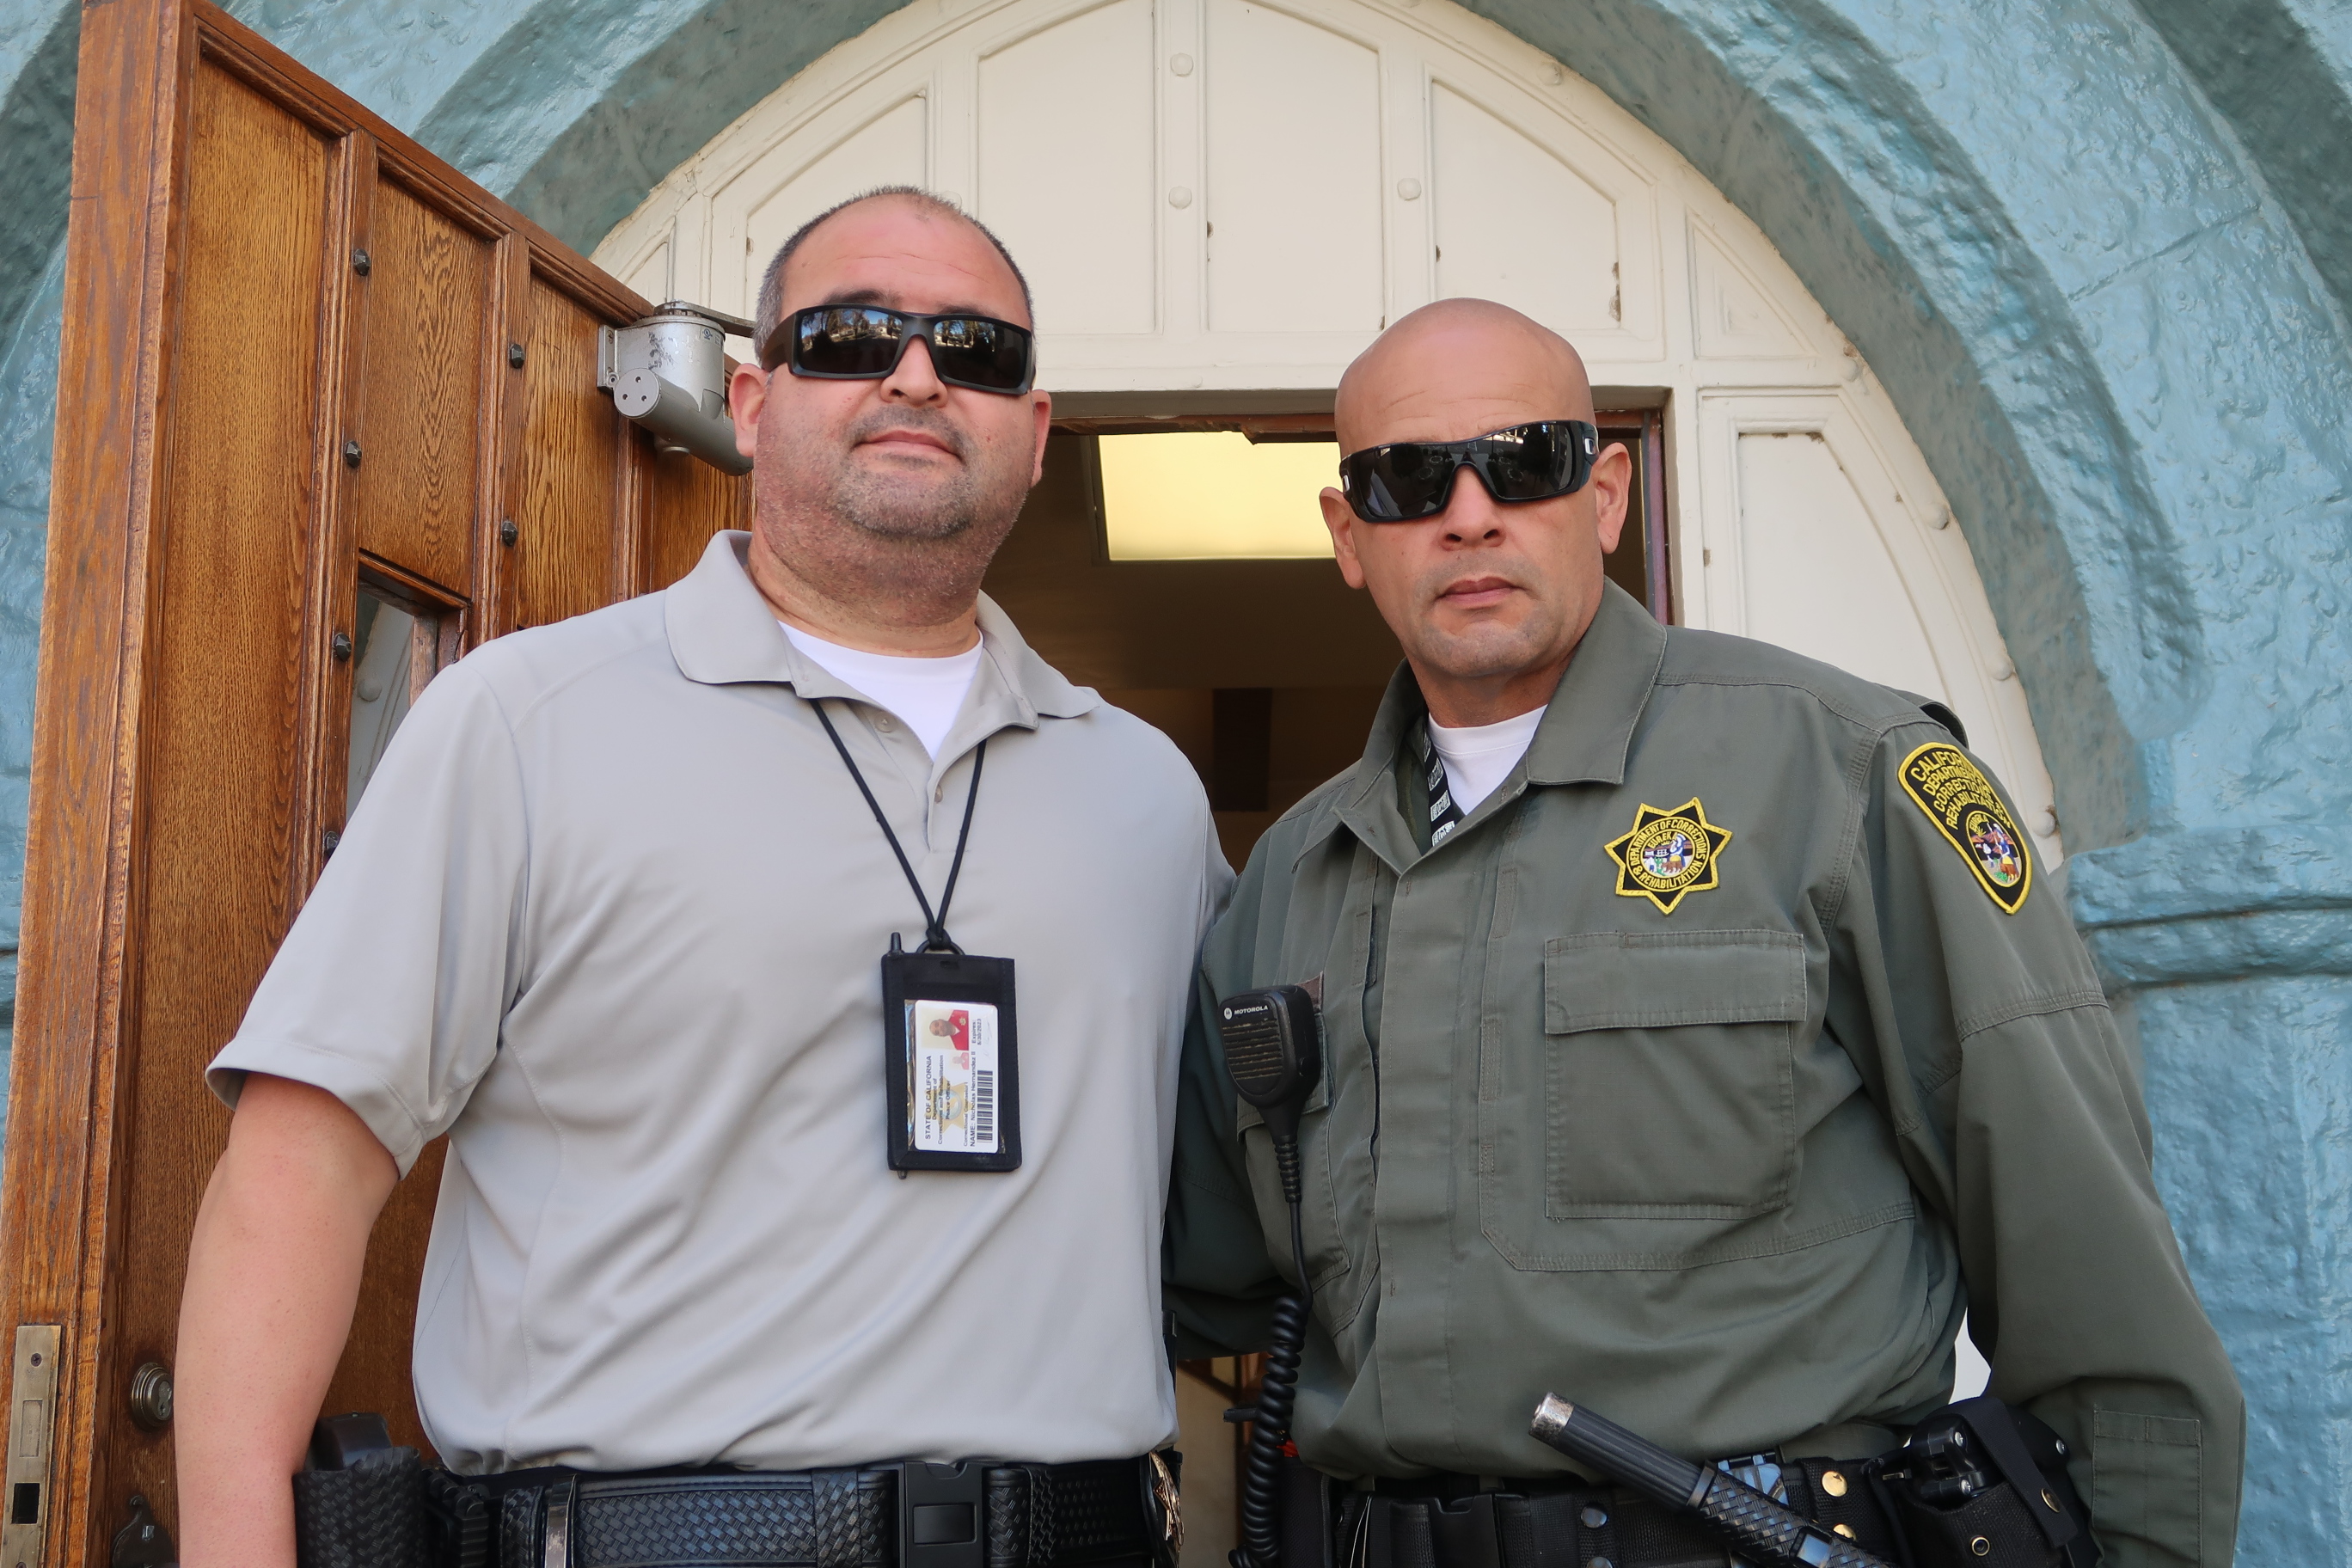 A man in uniform stands beside another man who is wearing a lanyard.